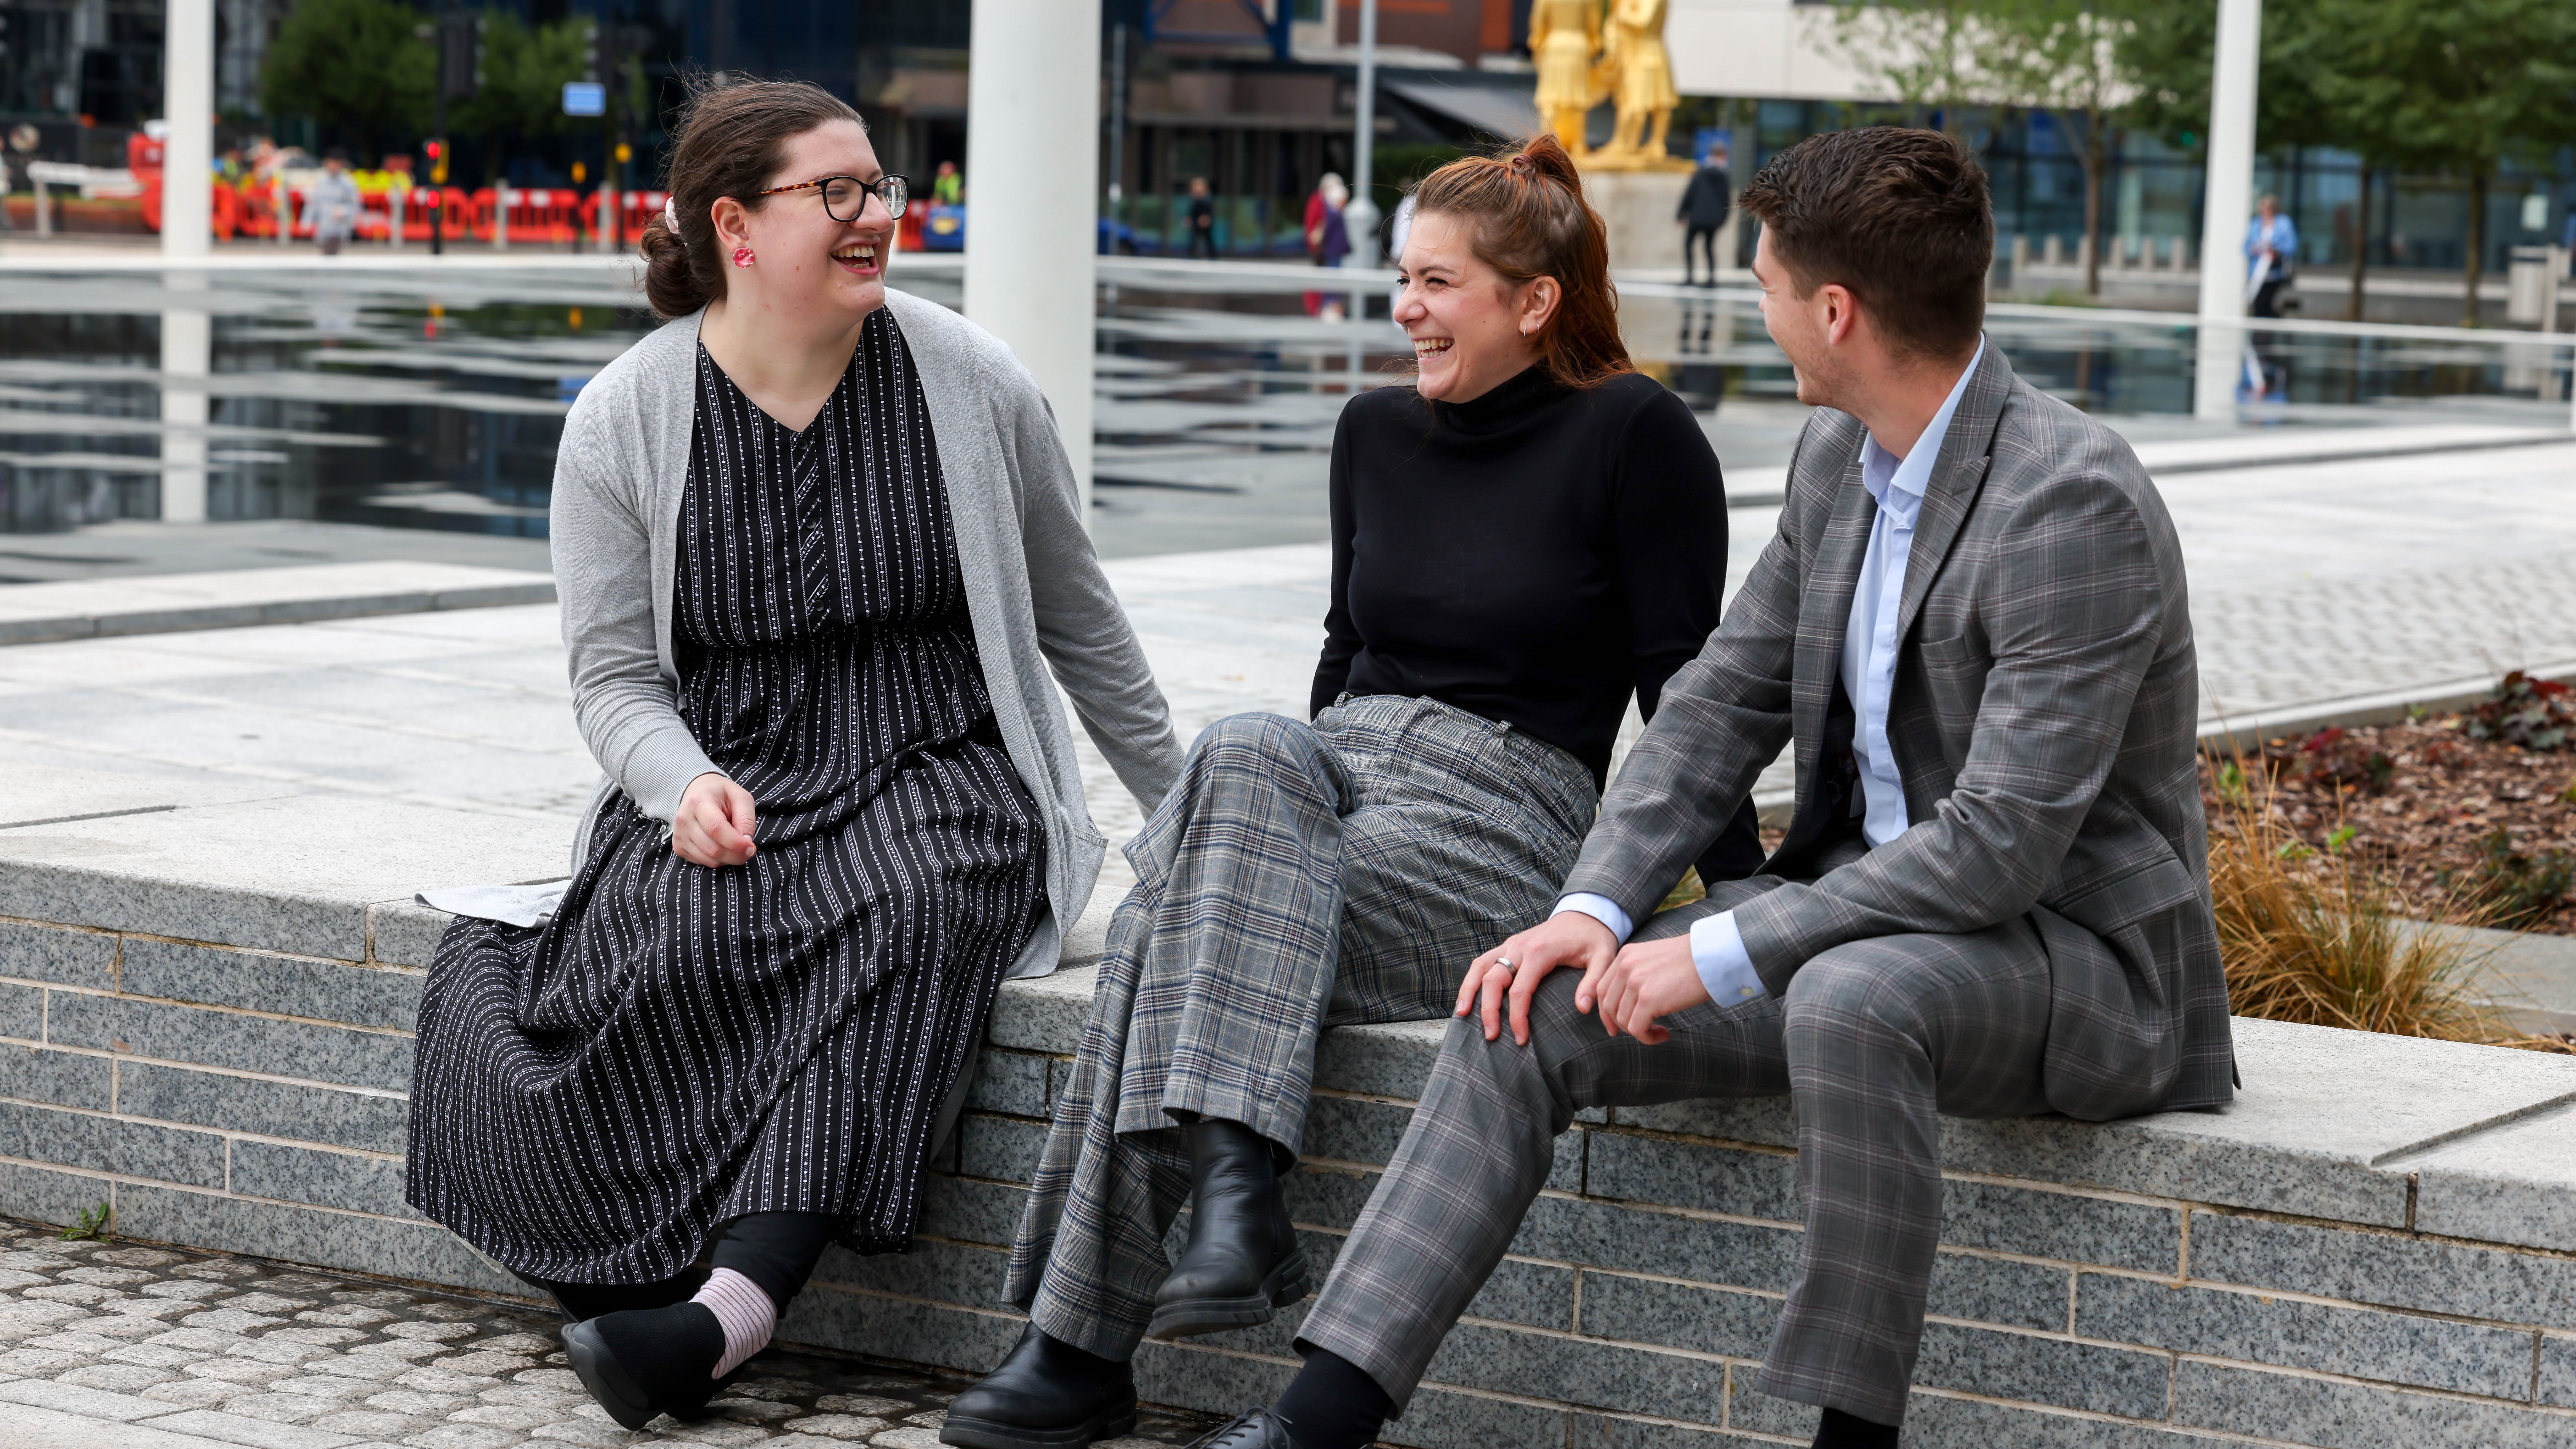 Three NGDP graduates sitting on wall outside dressed in work attire